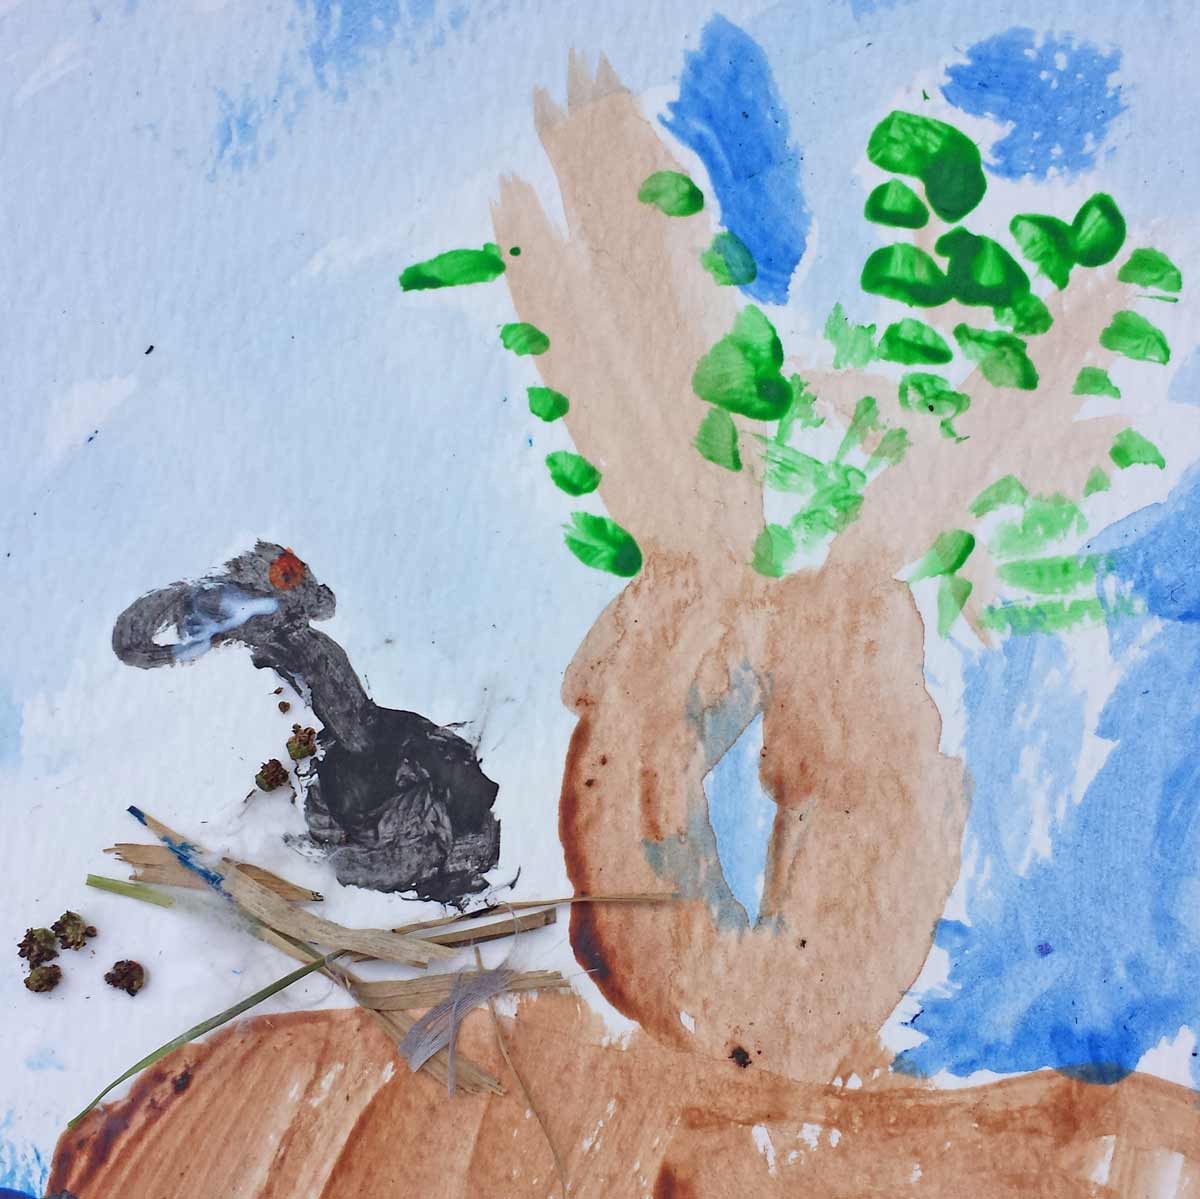 Bird nest collage - simple bird nest collages using water colour painting and natural resources #birds #nests #painting #collage #nature #naturelover #habitat #STEAM